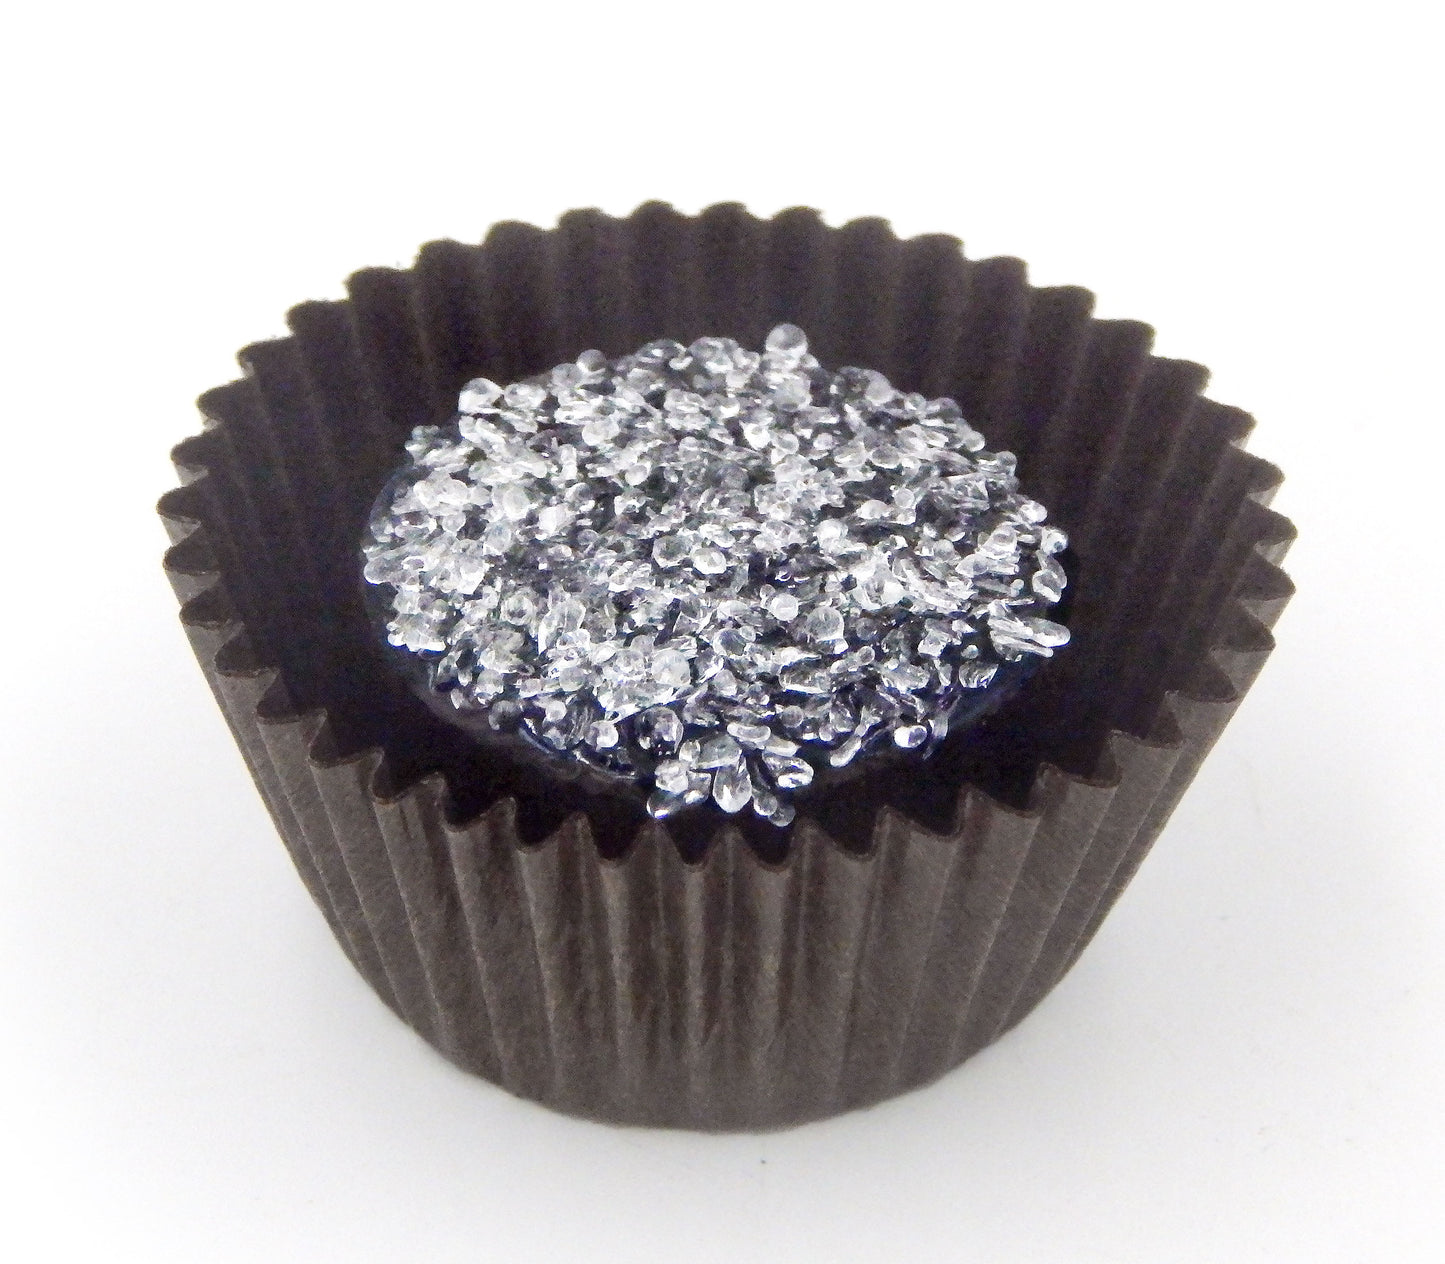 Glass Chocolate topped with Sugar Crystals (12-101C)